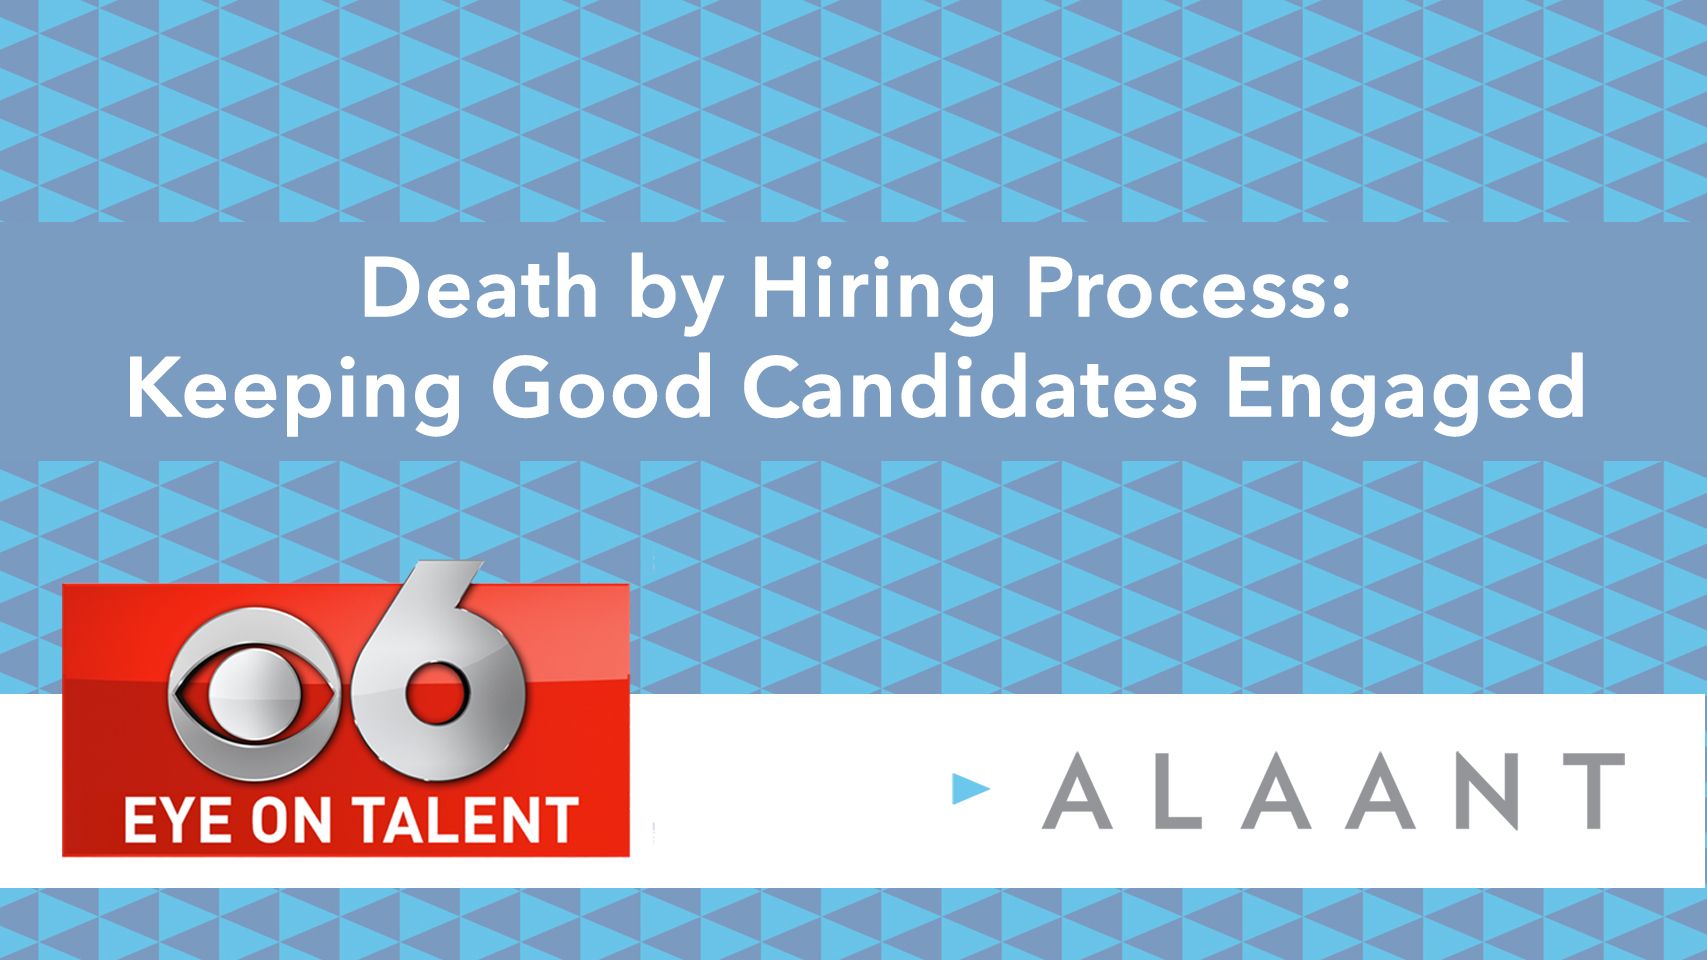 Alaant Eye on Talent - Death by Hiring Process: Keeping Good Candidates Engaged